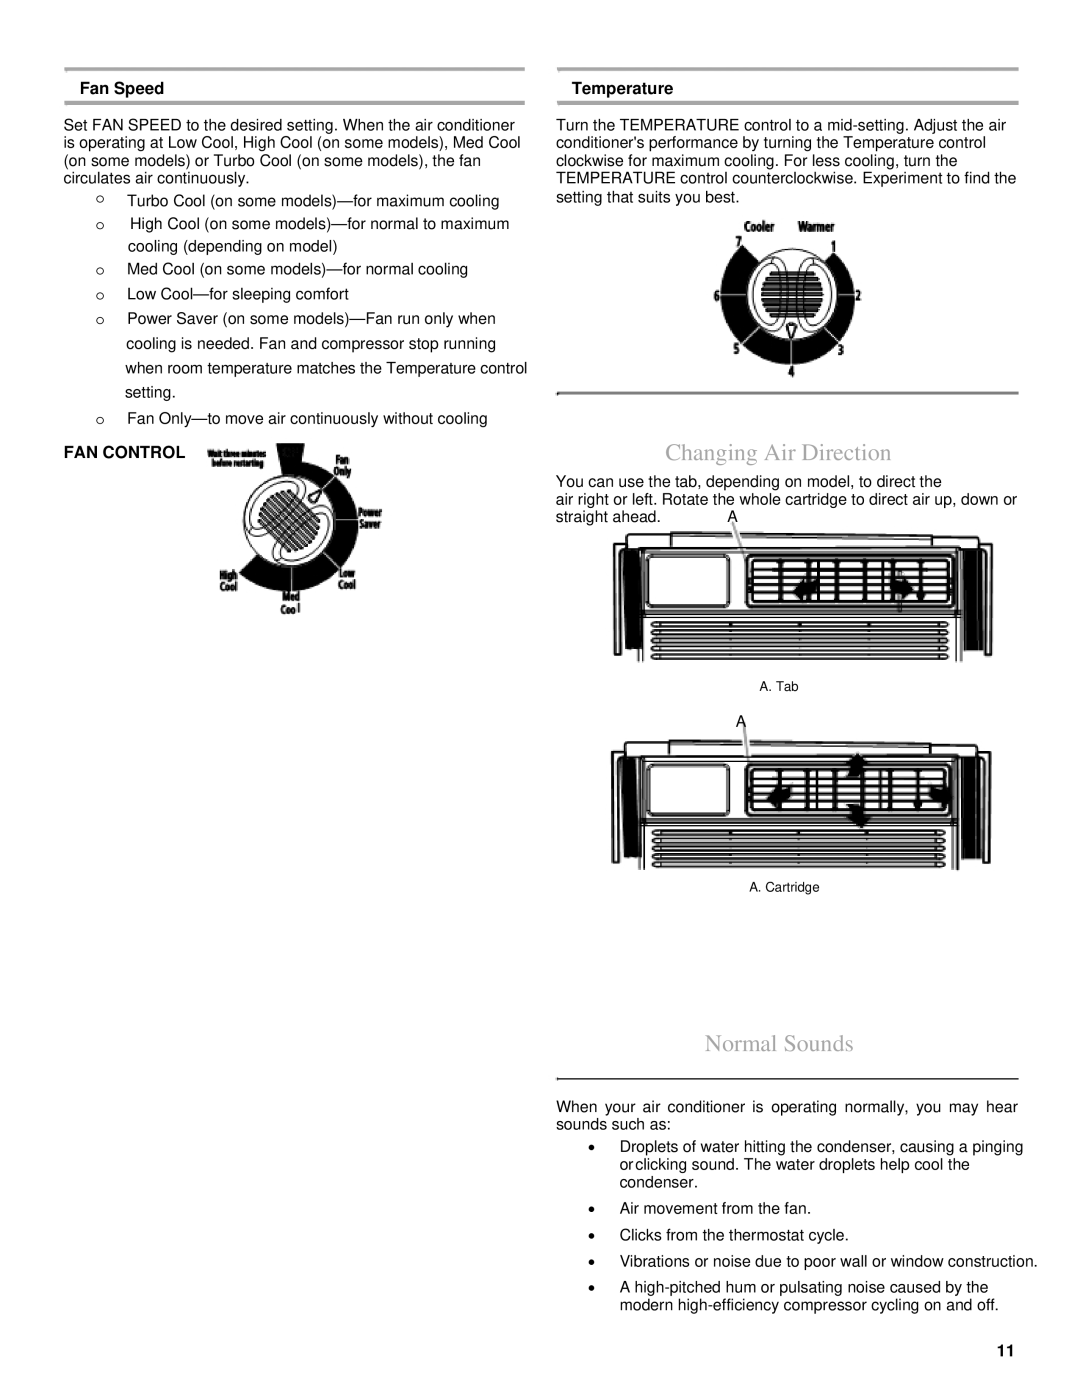 Soleus Air KC-32U, KC-25U, KC-35U, KC-15U, KC-18U owner manual Changing Air Direction, Normal Sounds, Fan Speed, Fan Control 